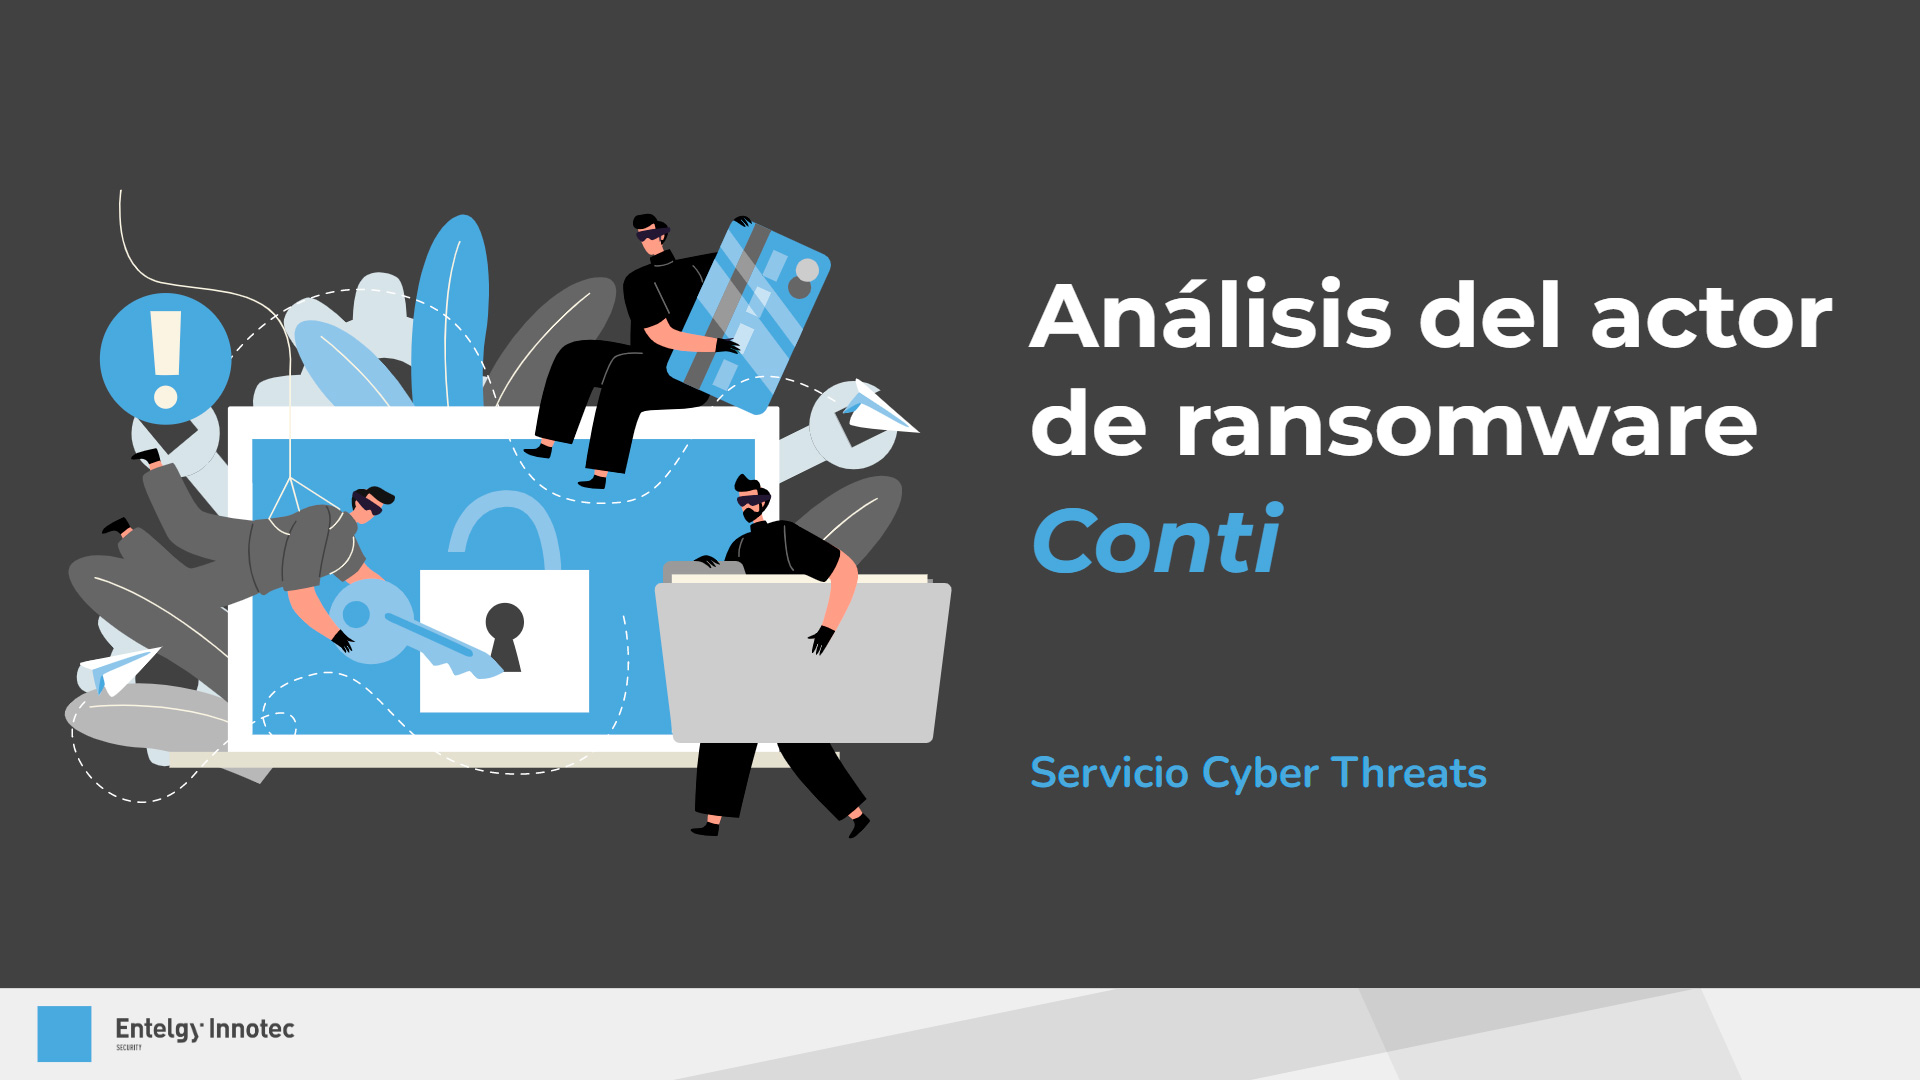 Analysis of the Conti ransomware actor